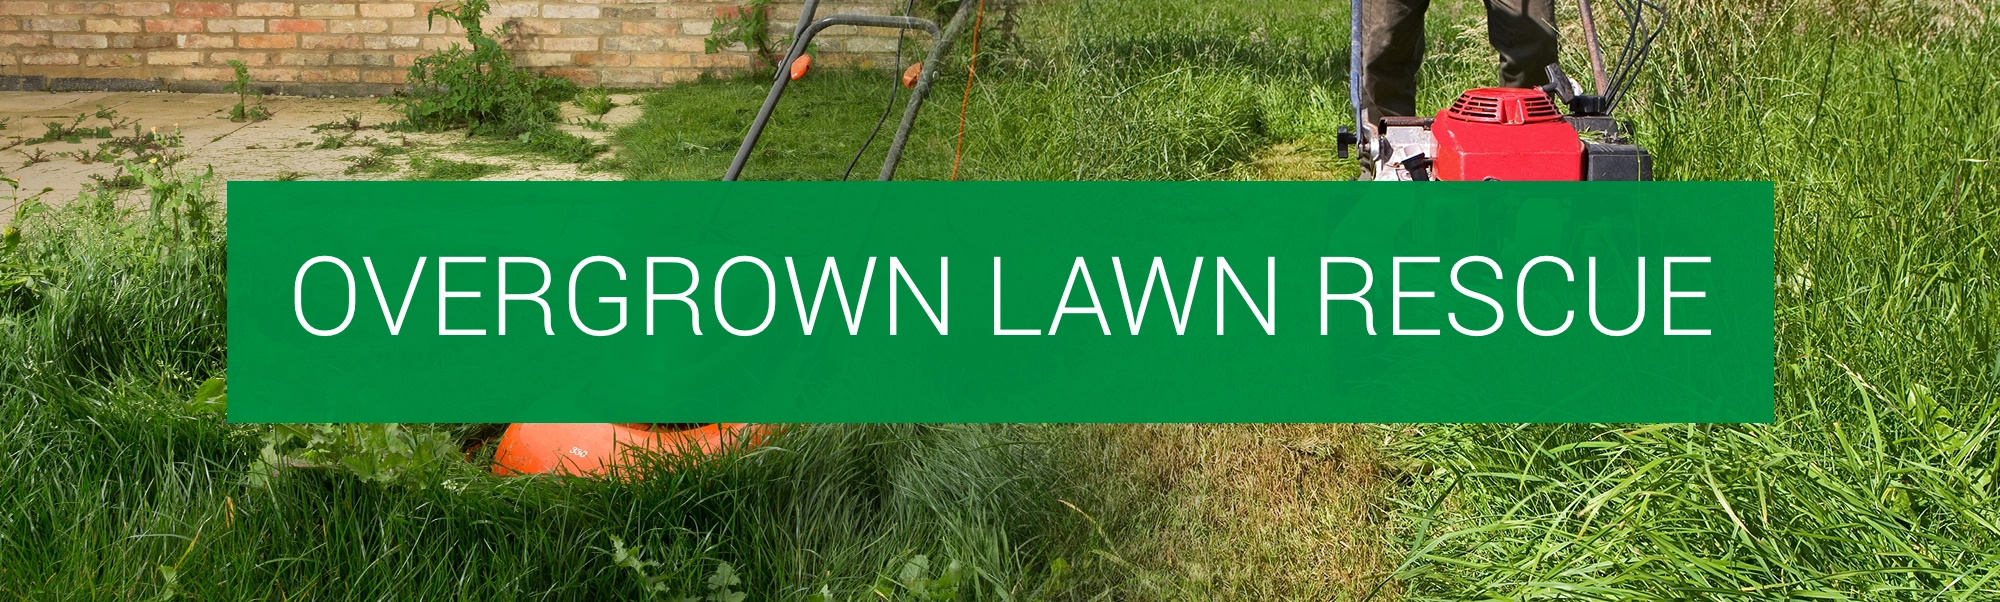 Lawn Care Services in Indiana - Overgrown Lawn Rescue